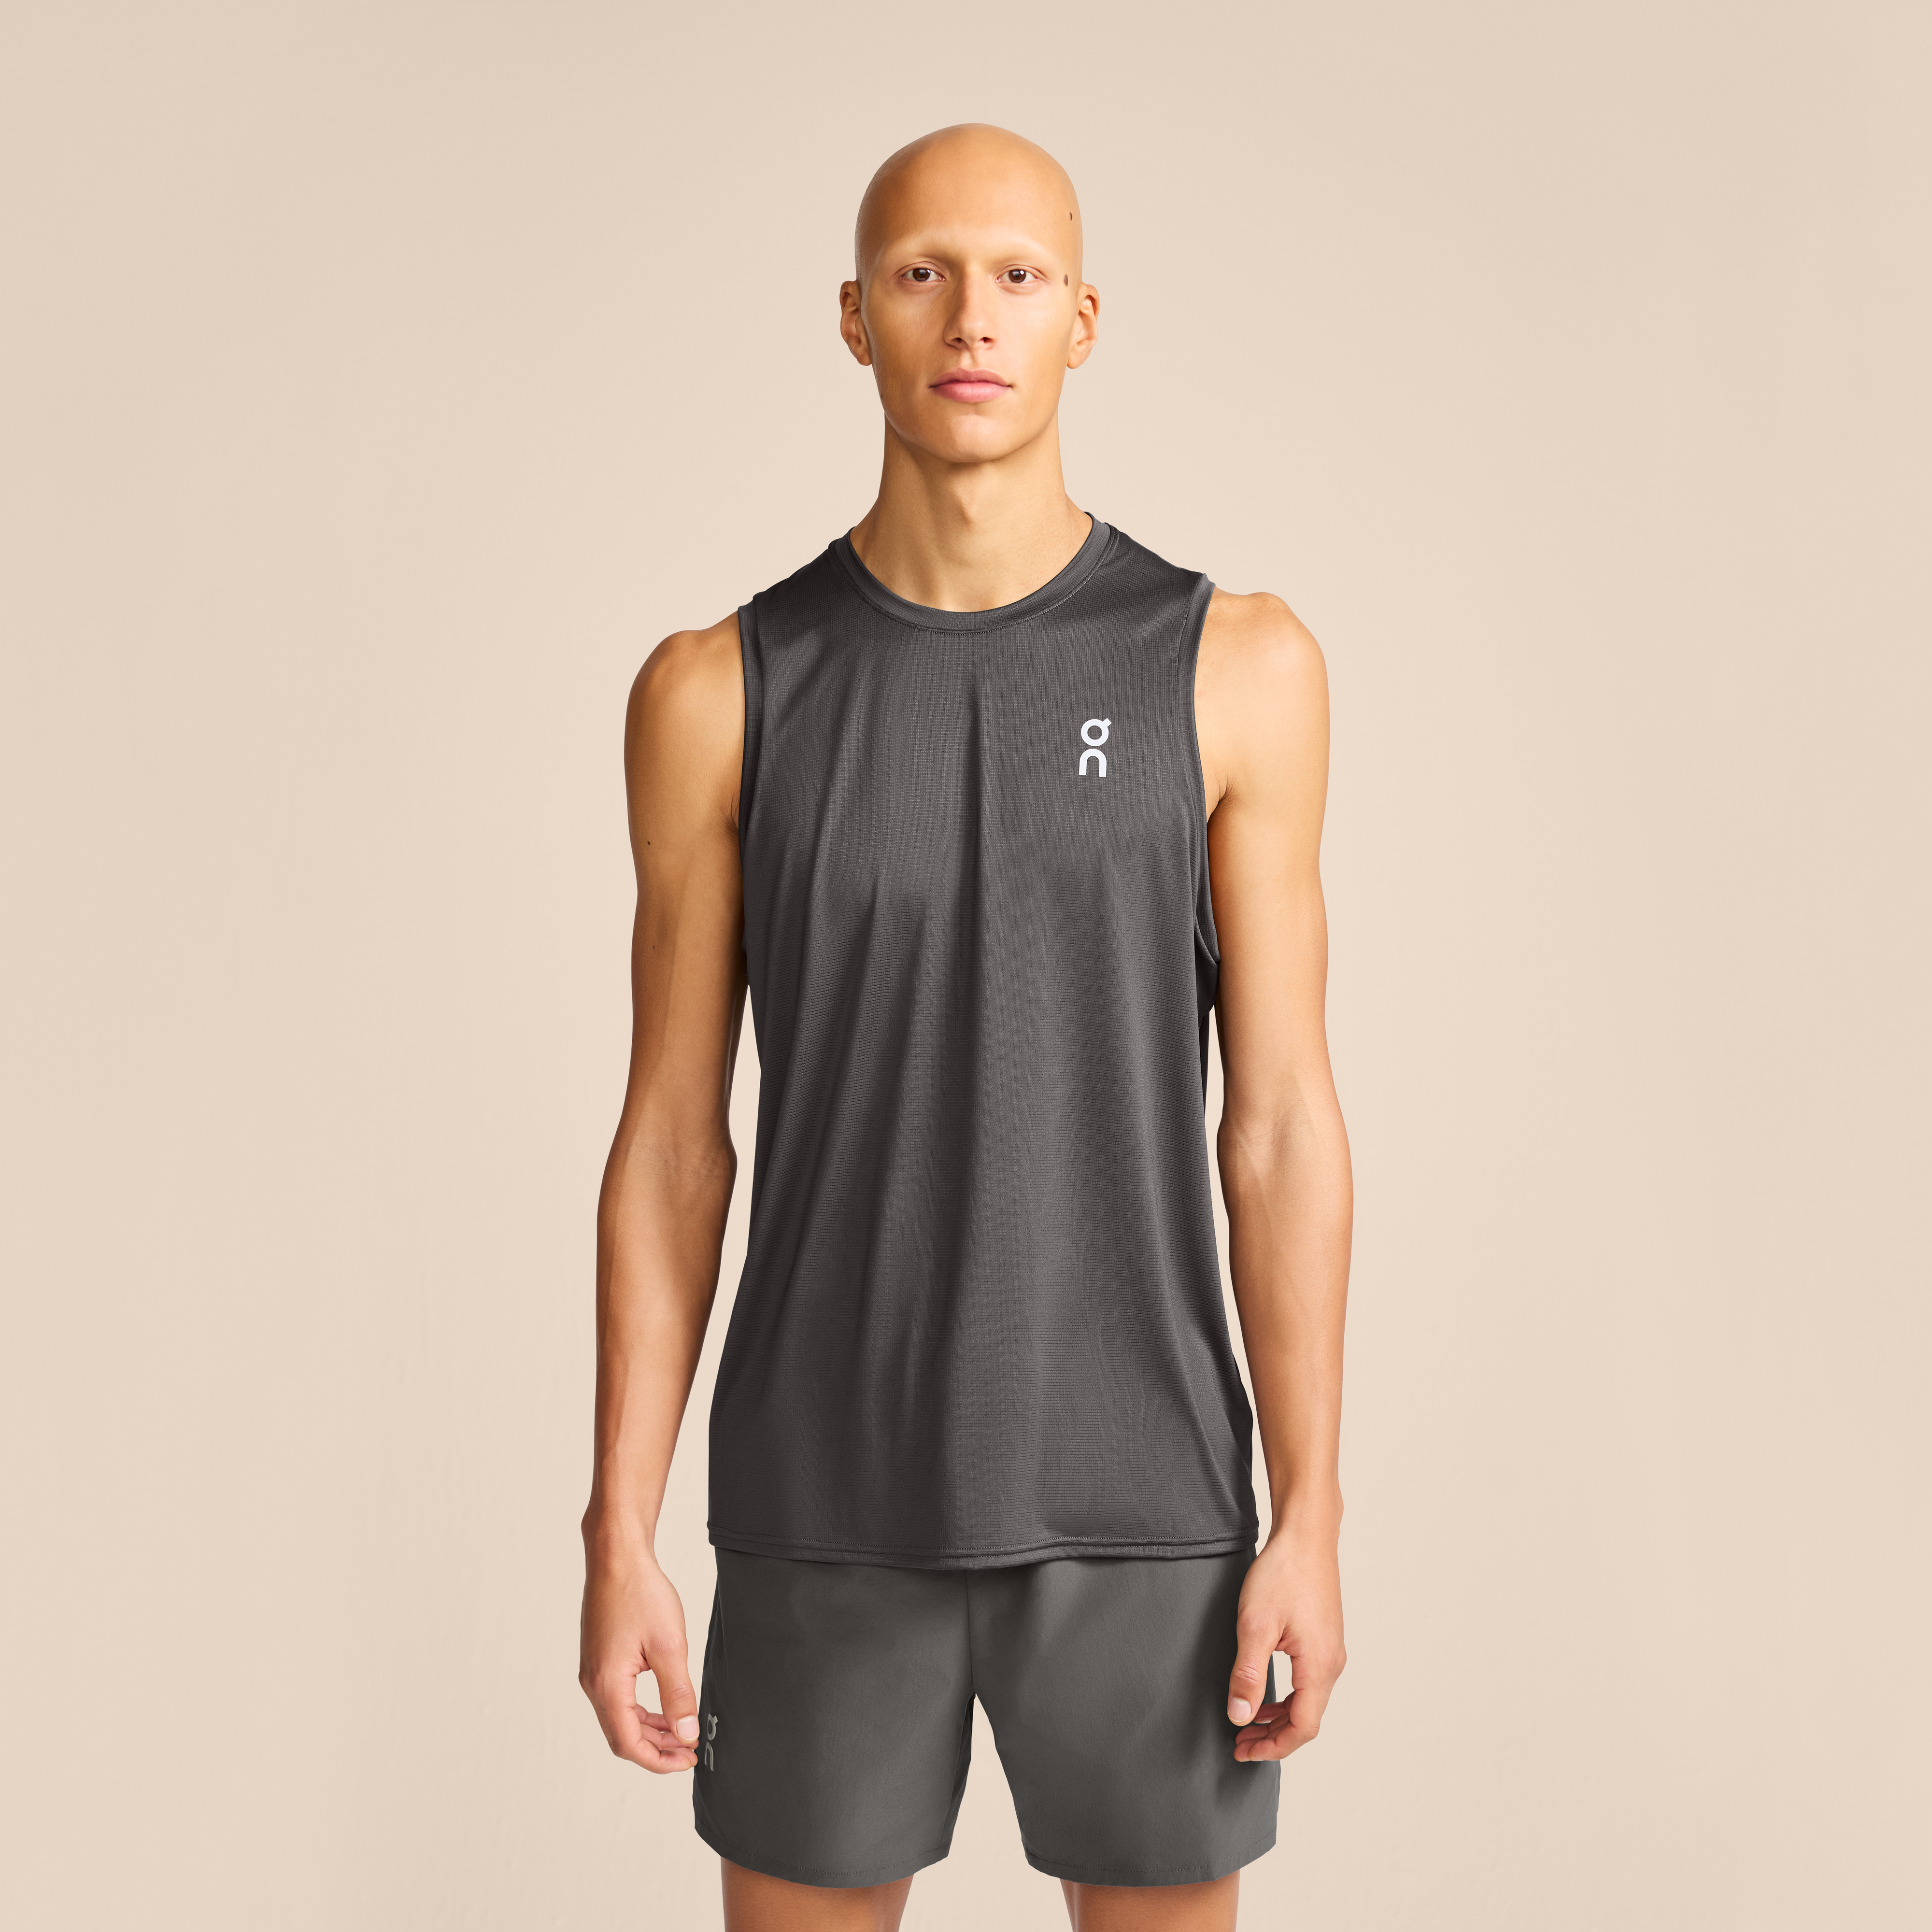 Men's Tank Top Light Distance | Green | On United States